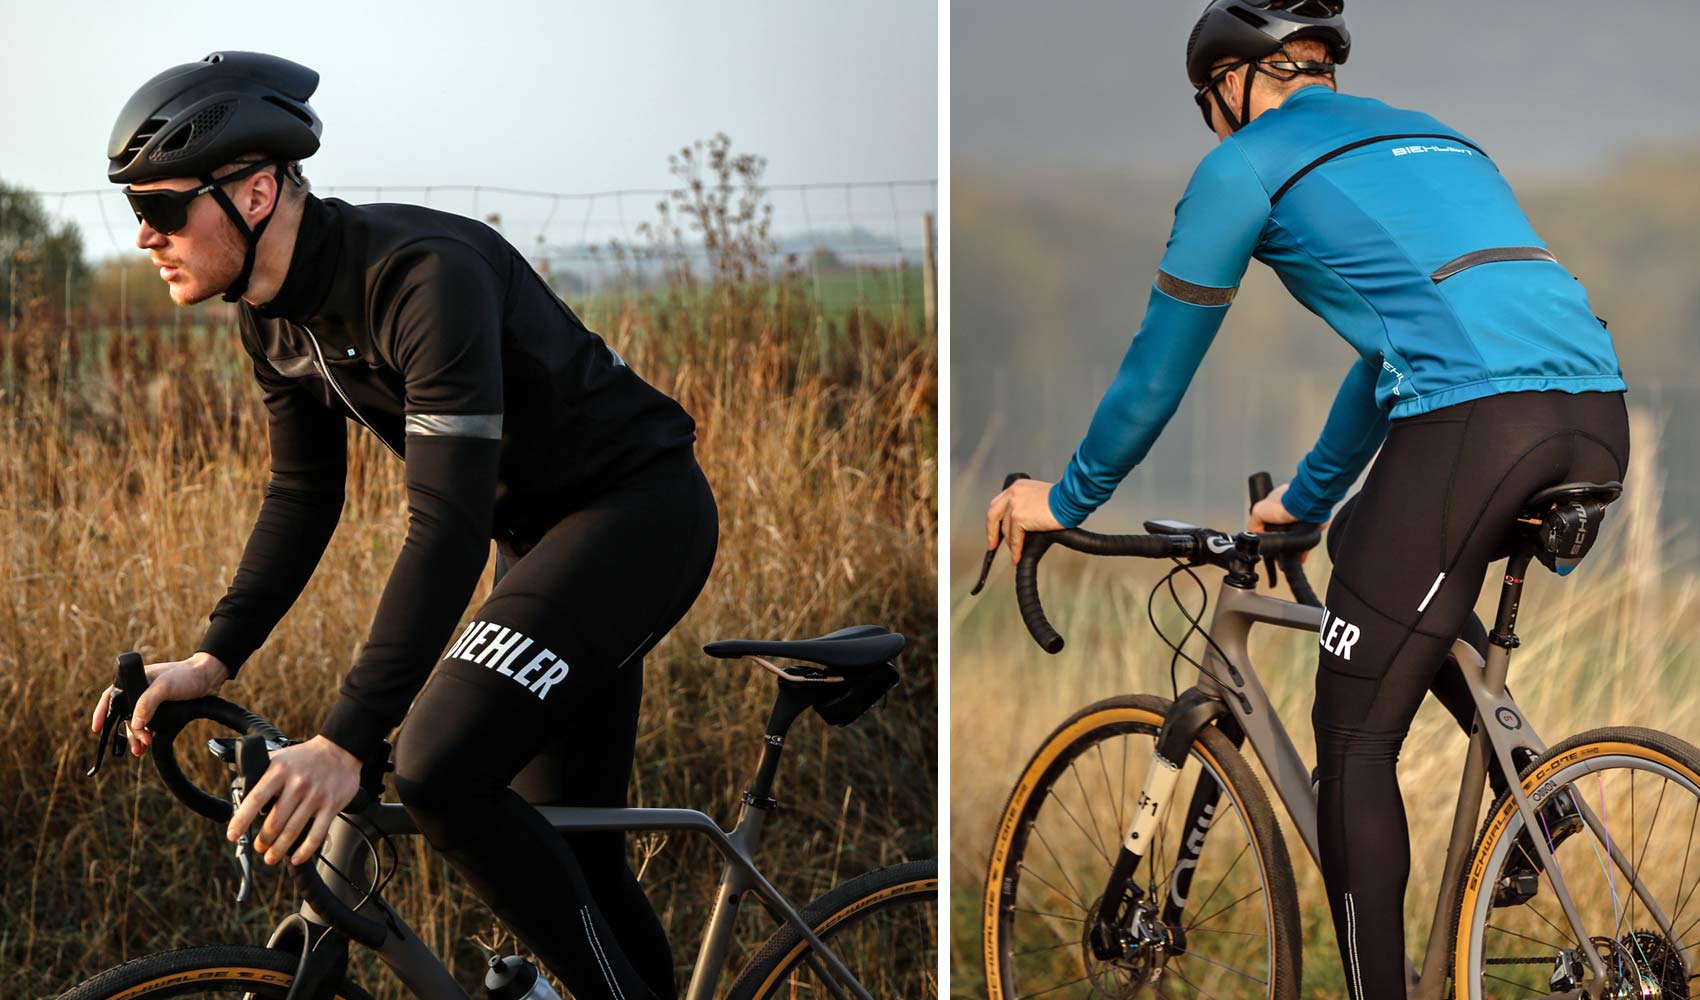 Rapha Pro Team gears up for cold riding with new Winter Jacket, bibs,  tights, hat & more - Bikerumor